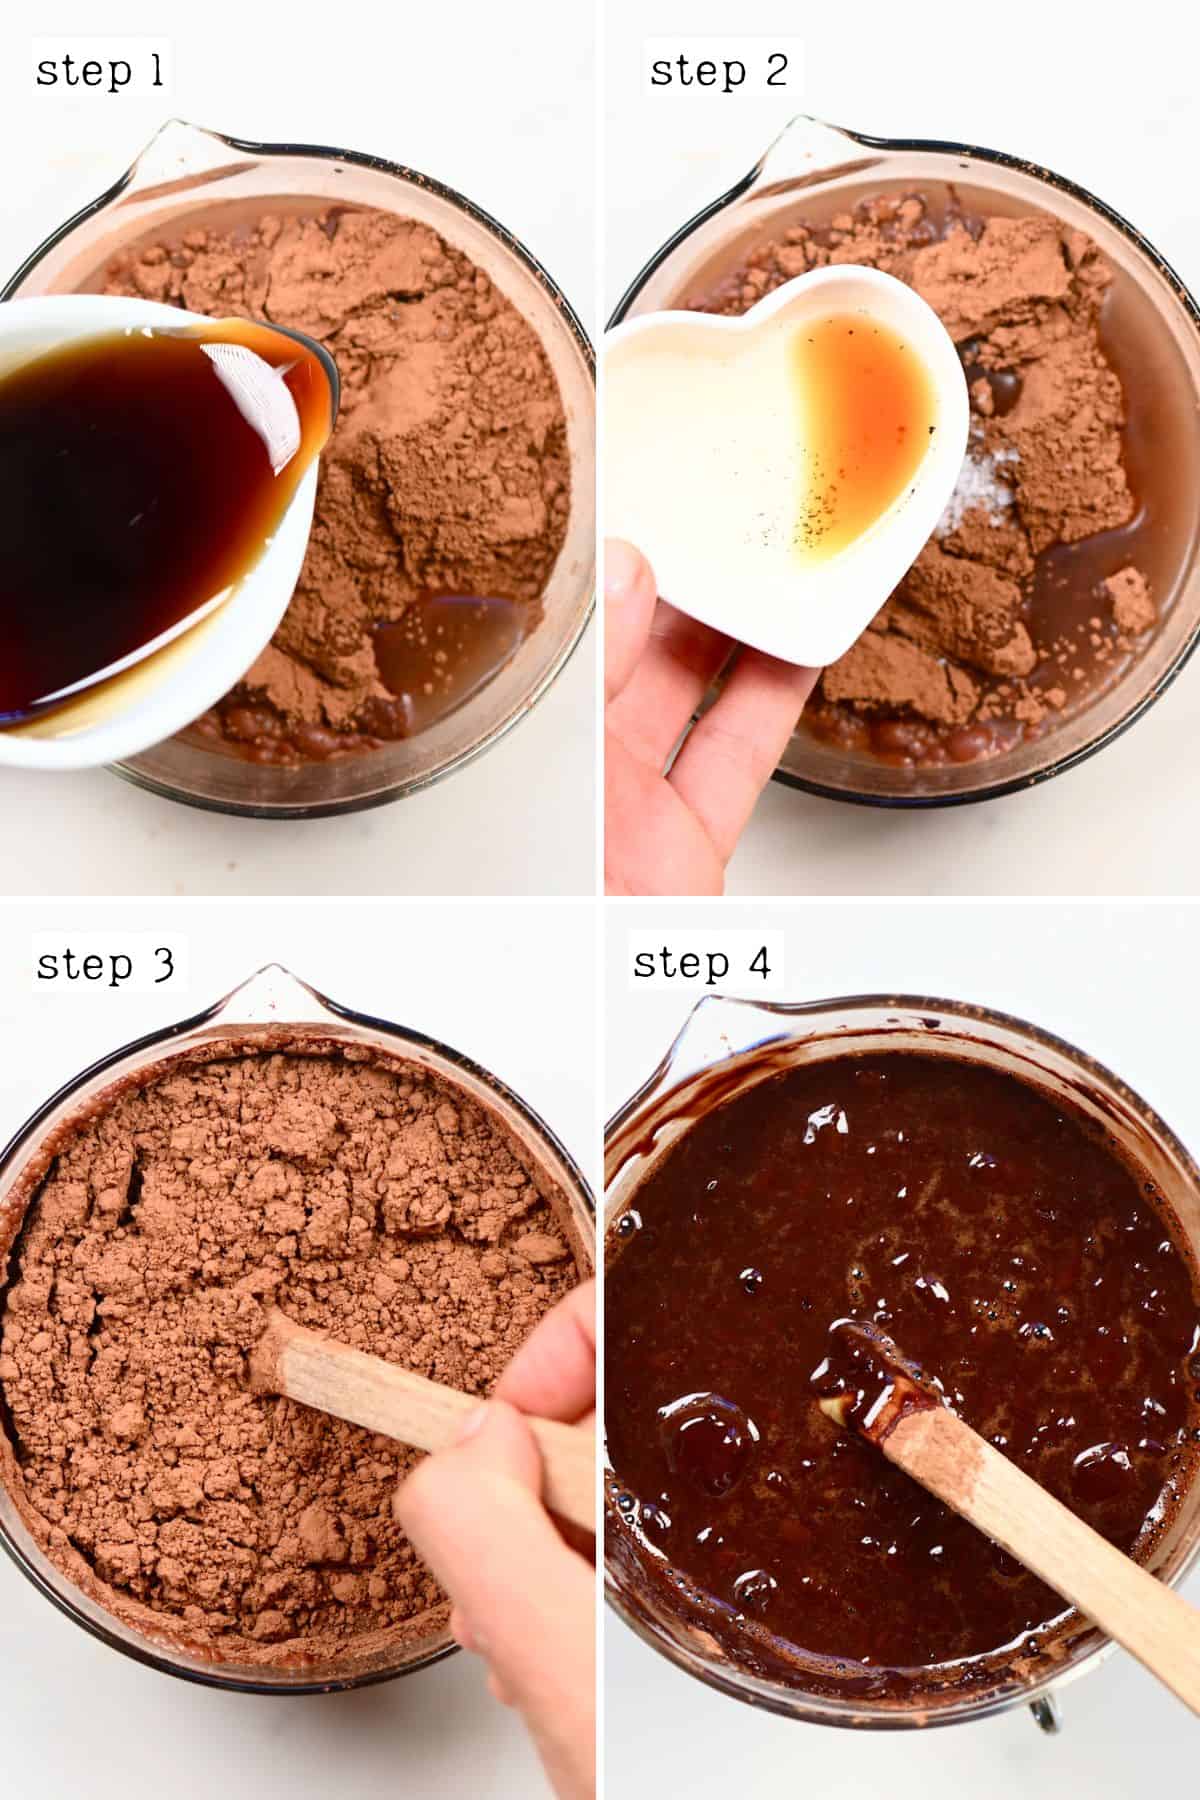 Steps for making chocolate syrup